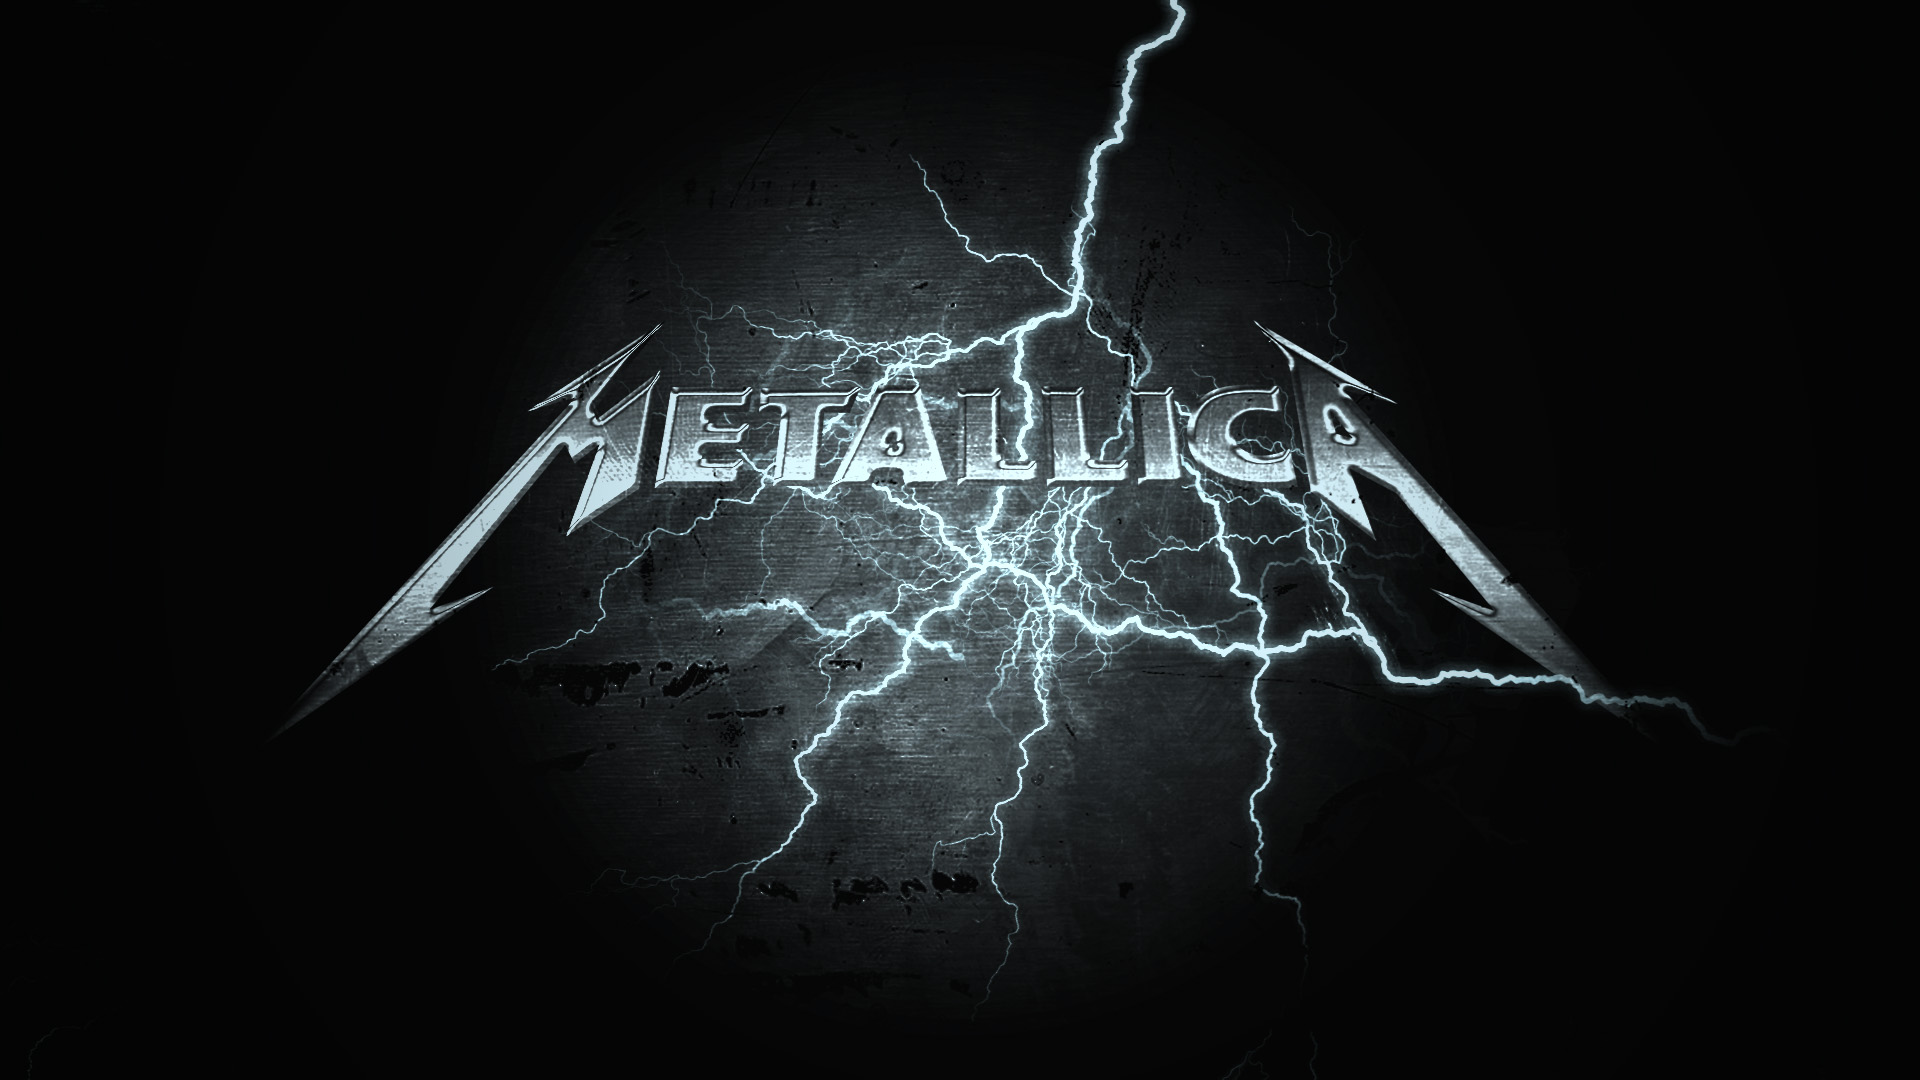 Metallica - Black Album - Rock and Metal Music Concert Poster - Canvas  Prints by Tallenge Store | Buy Posters, Frames, Canvas & Digital Art Prints  | Small, Compact, Medium and Large Variants